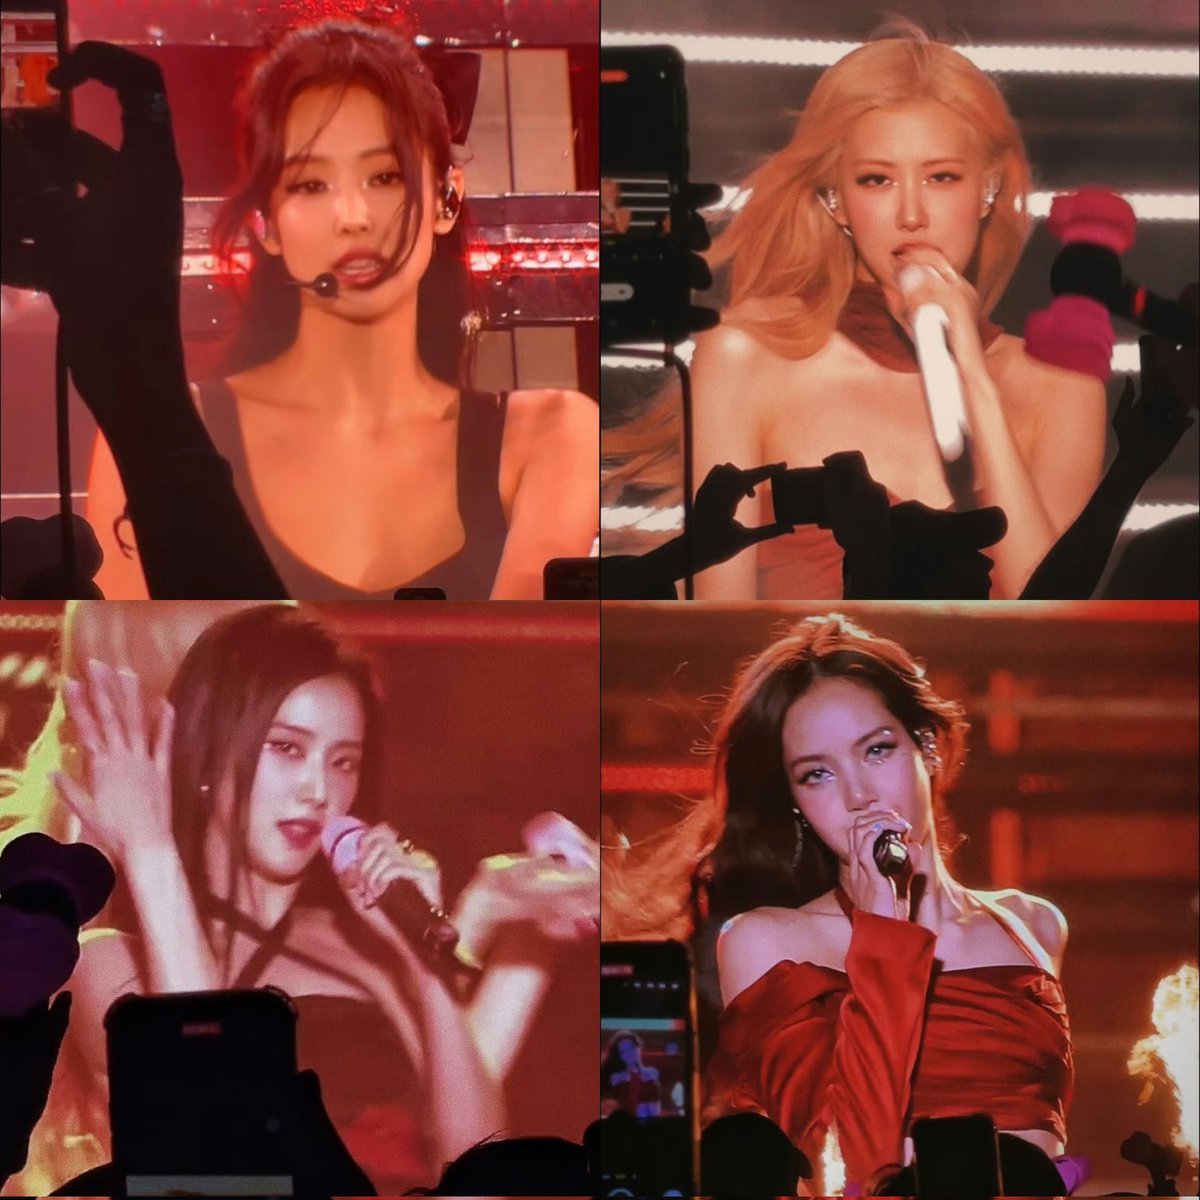 Kpop stans will never convince me that blackpink members are ugly 💀